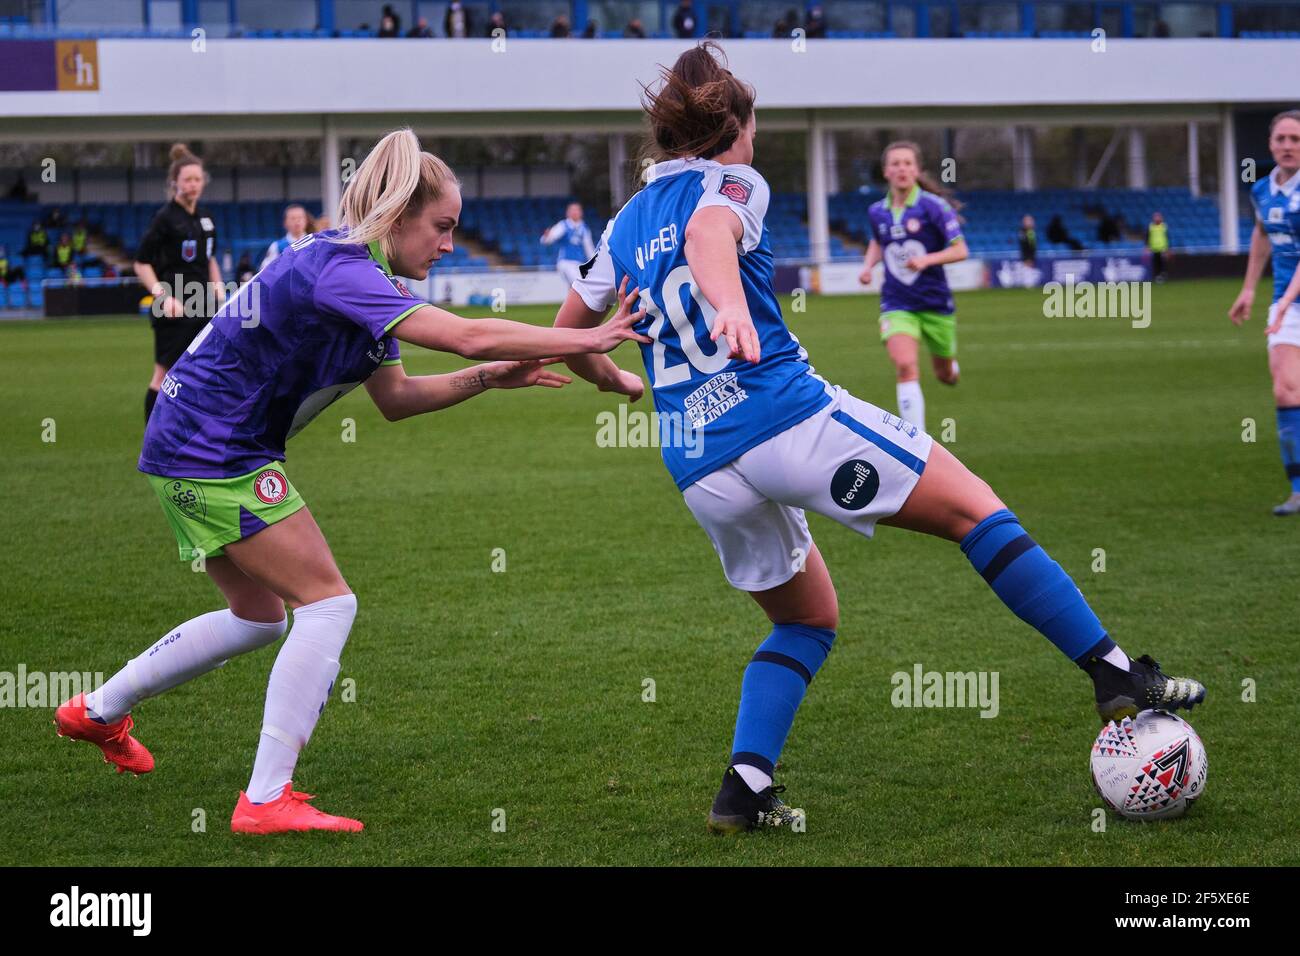 Solihull, UK. 28th Mar, 2021. Jamie-Lee Napier (#20 Birmingham City) and Faye Bryson (#2 Bristol City) battle for the ball during the FA Women's Super League match between Birmingham City and Bristol City at SportNation.bet Stadium in Solihull, England. Credit: SPP Sport Press Photo. /Alamy Live News Stock Photo